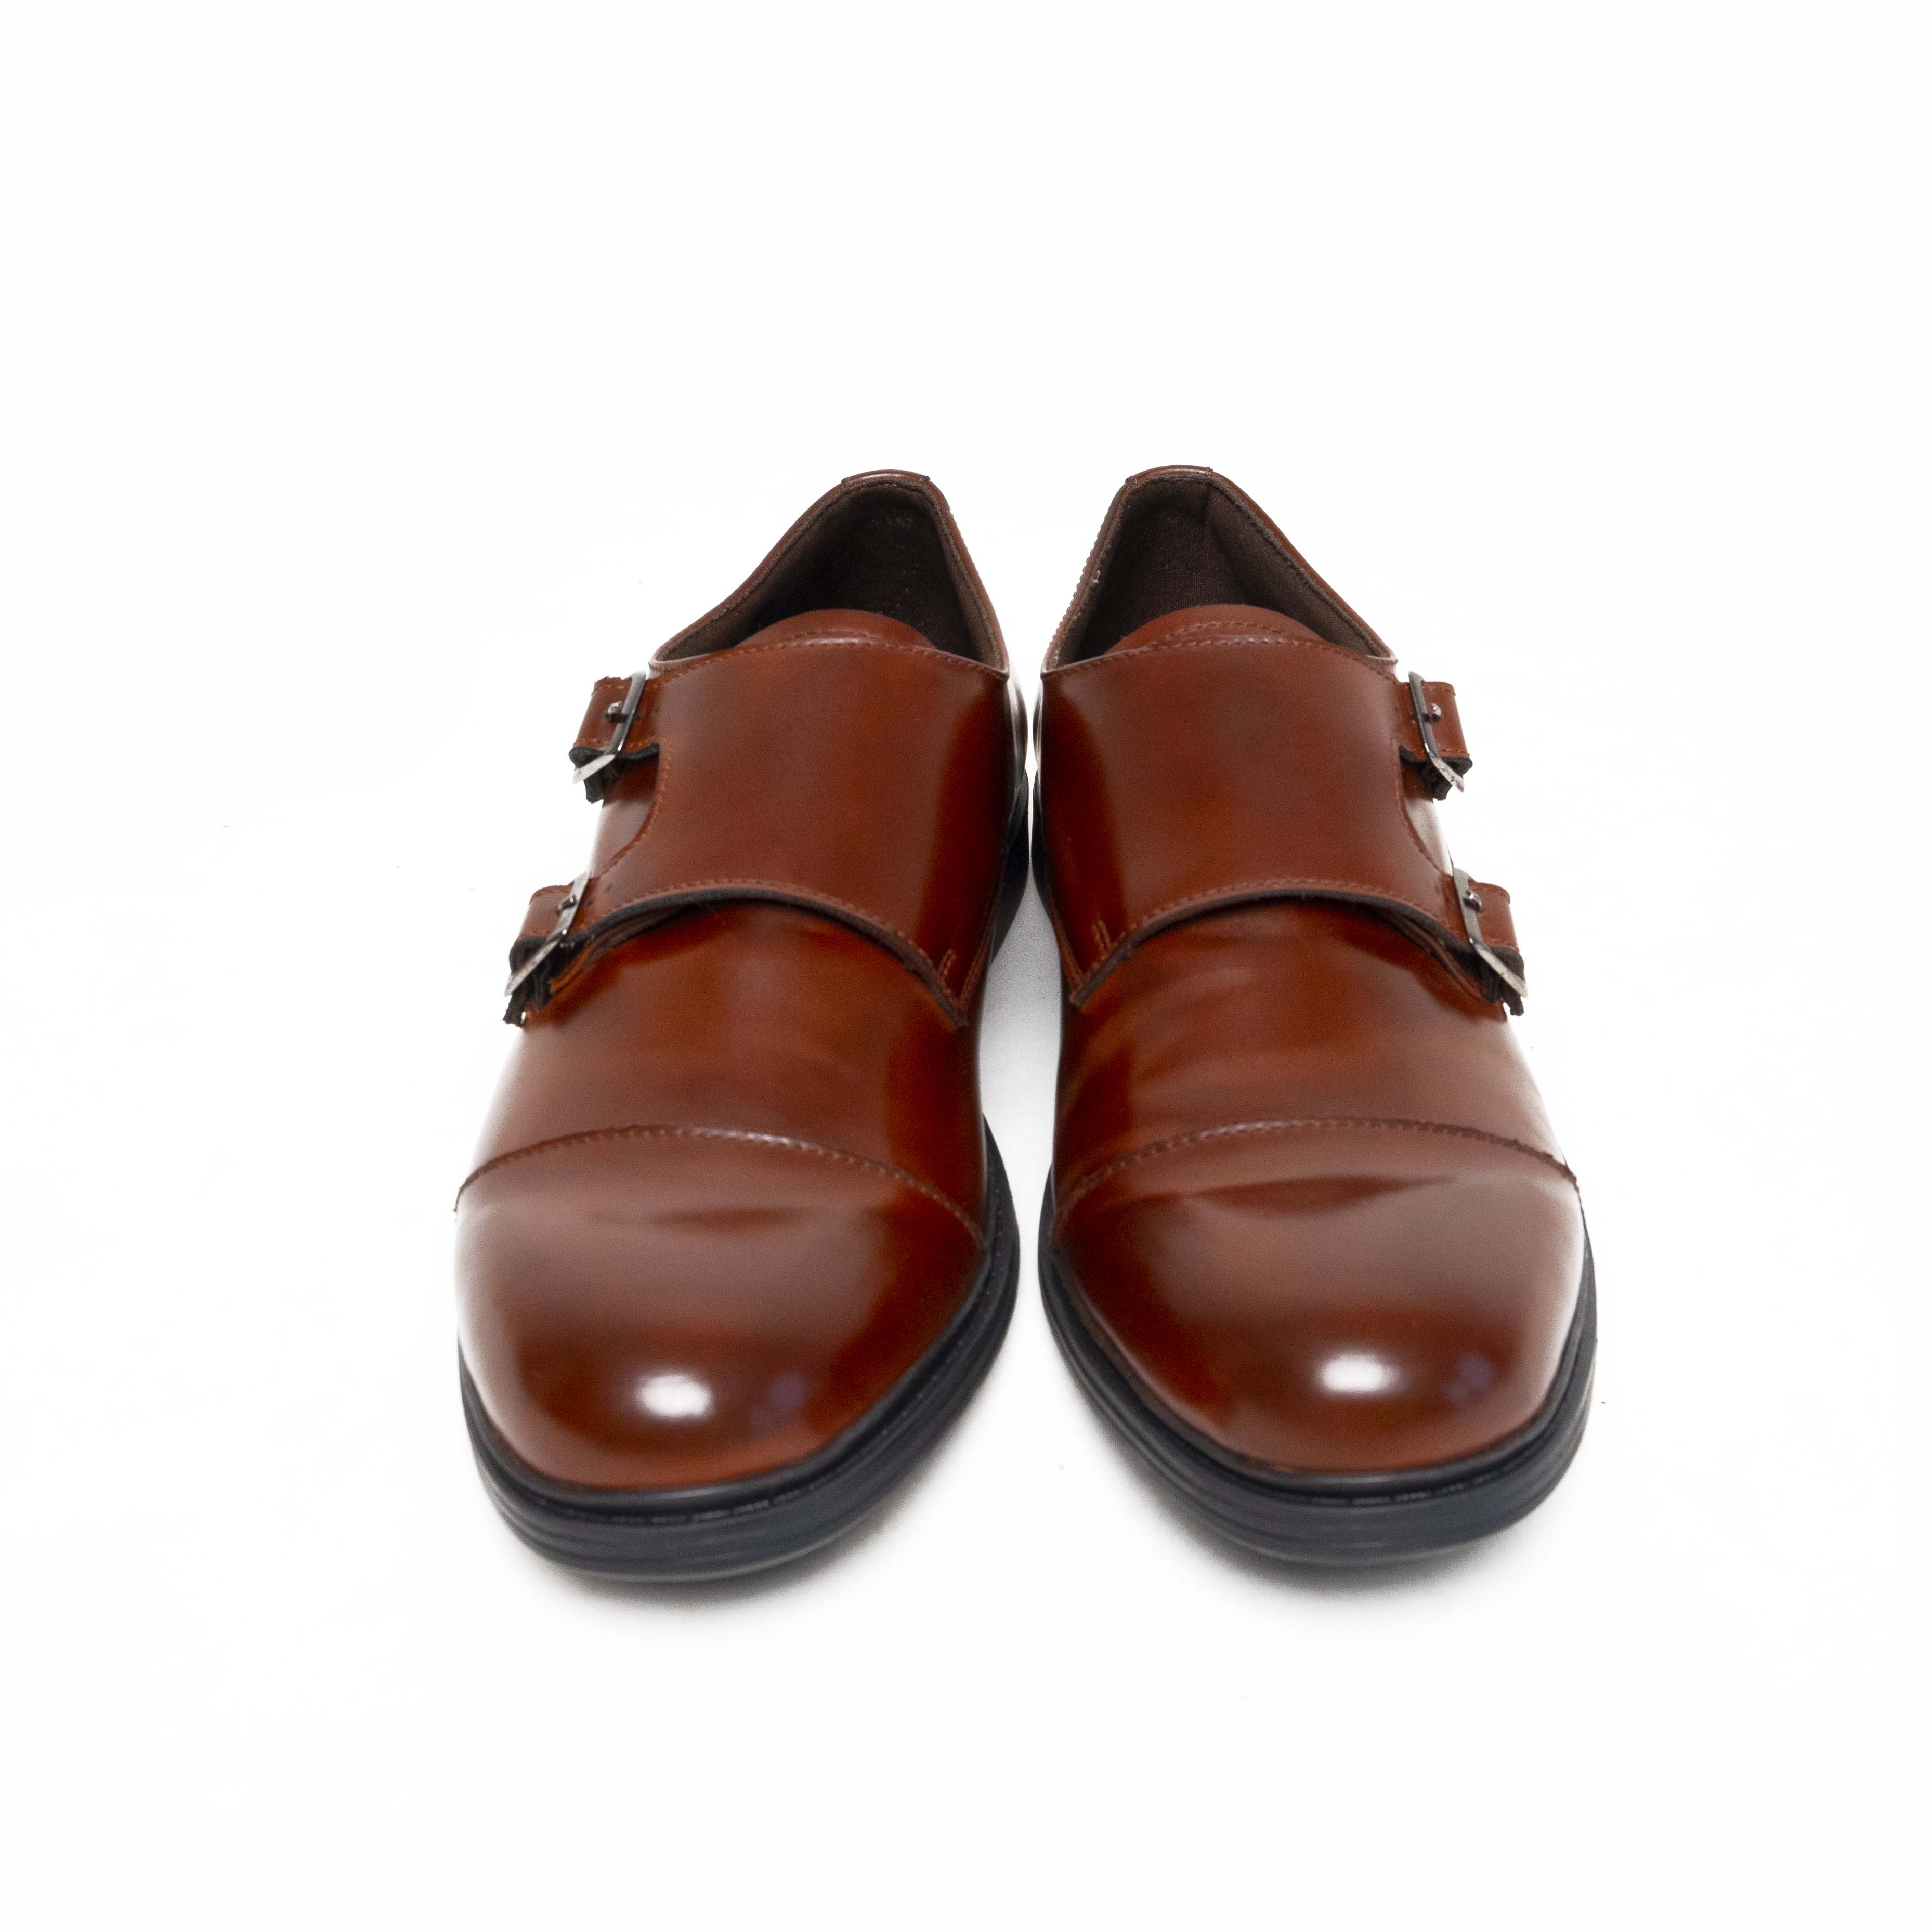 MONK STRAP LEATHER SHOES BROWN